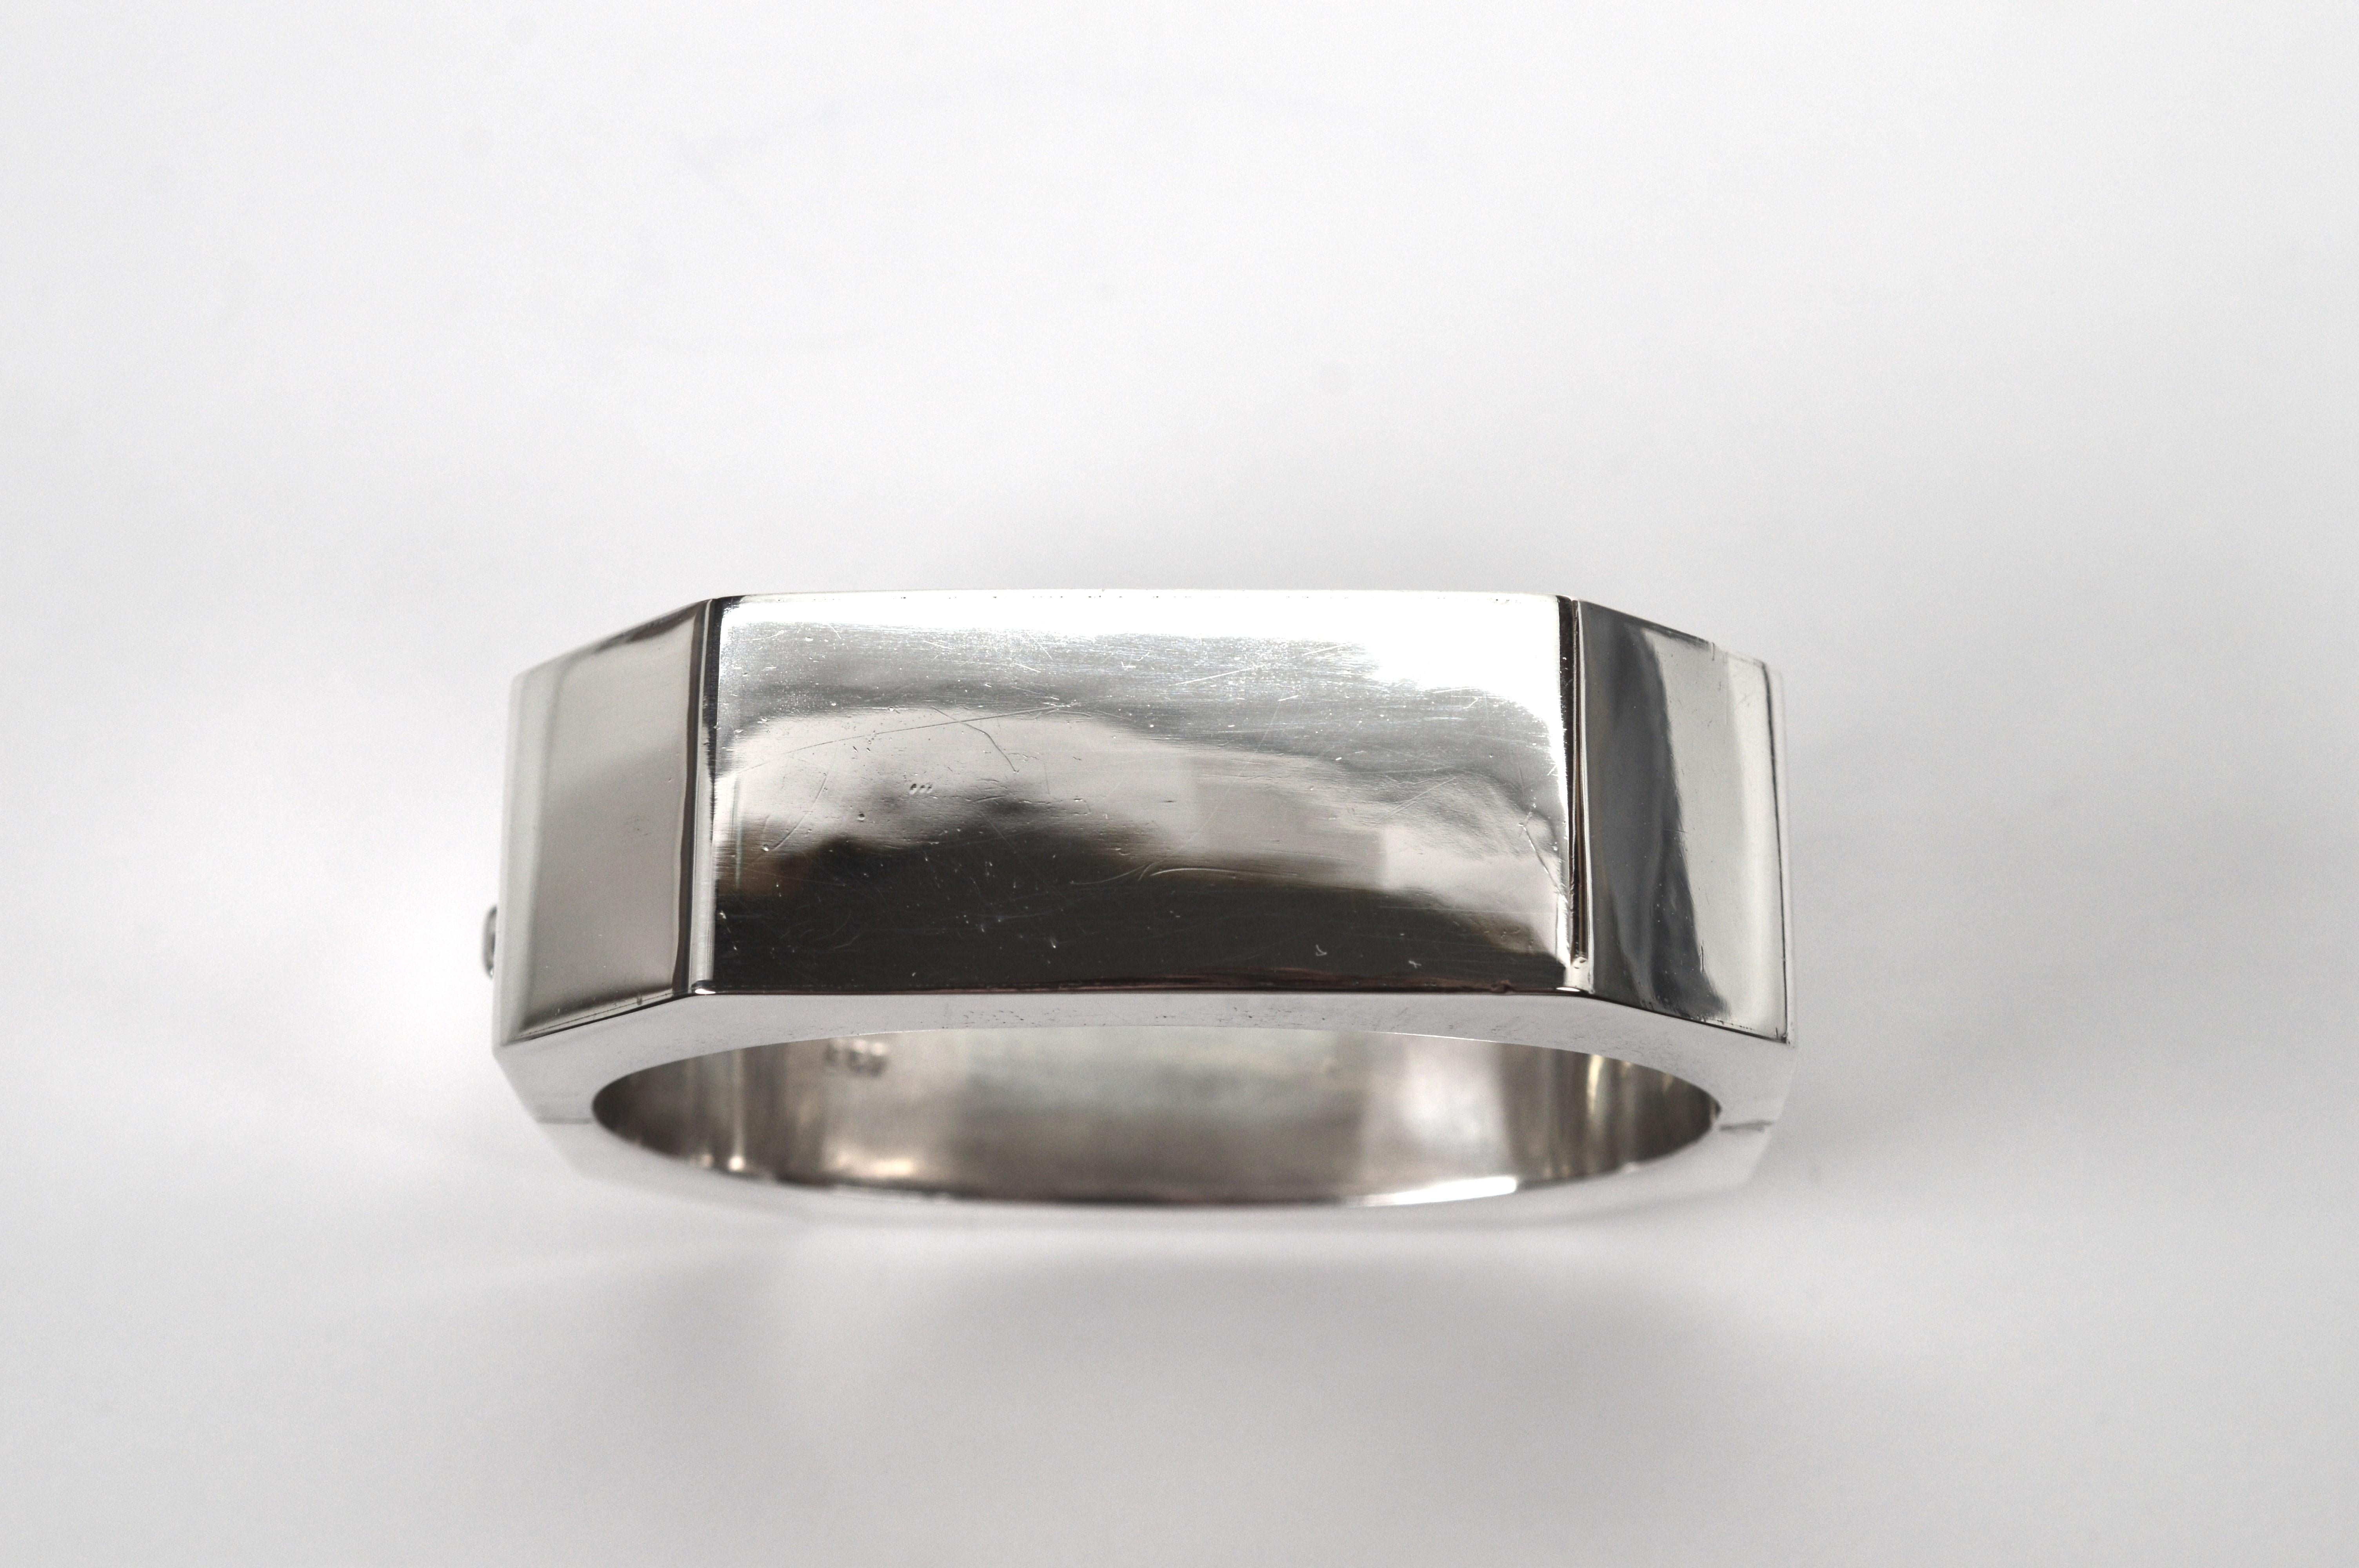 Geometrically contoured with eight angled sides in .925 sterling silver, this interesting vintage bangle bracelet with its bright finish, is a generous 3/4 inch wide. Great for stacking or as a singular piece. This quality silver bracelet is